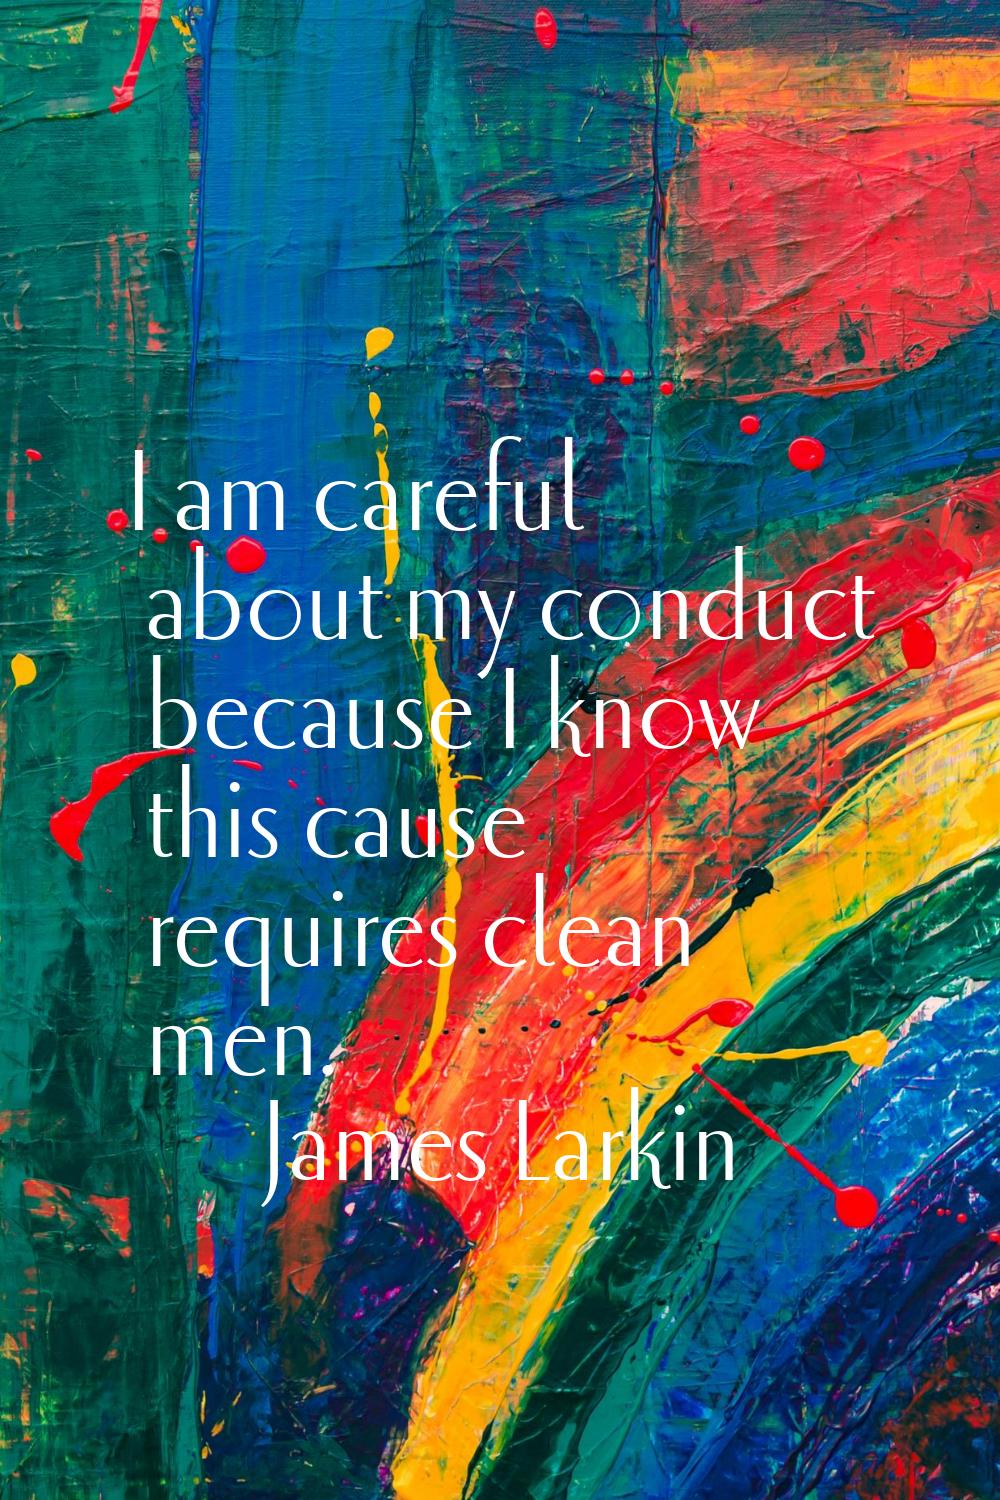 I am careful about my conduct because I know this cause requires clean men.